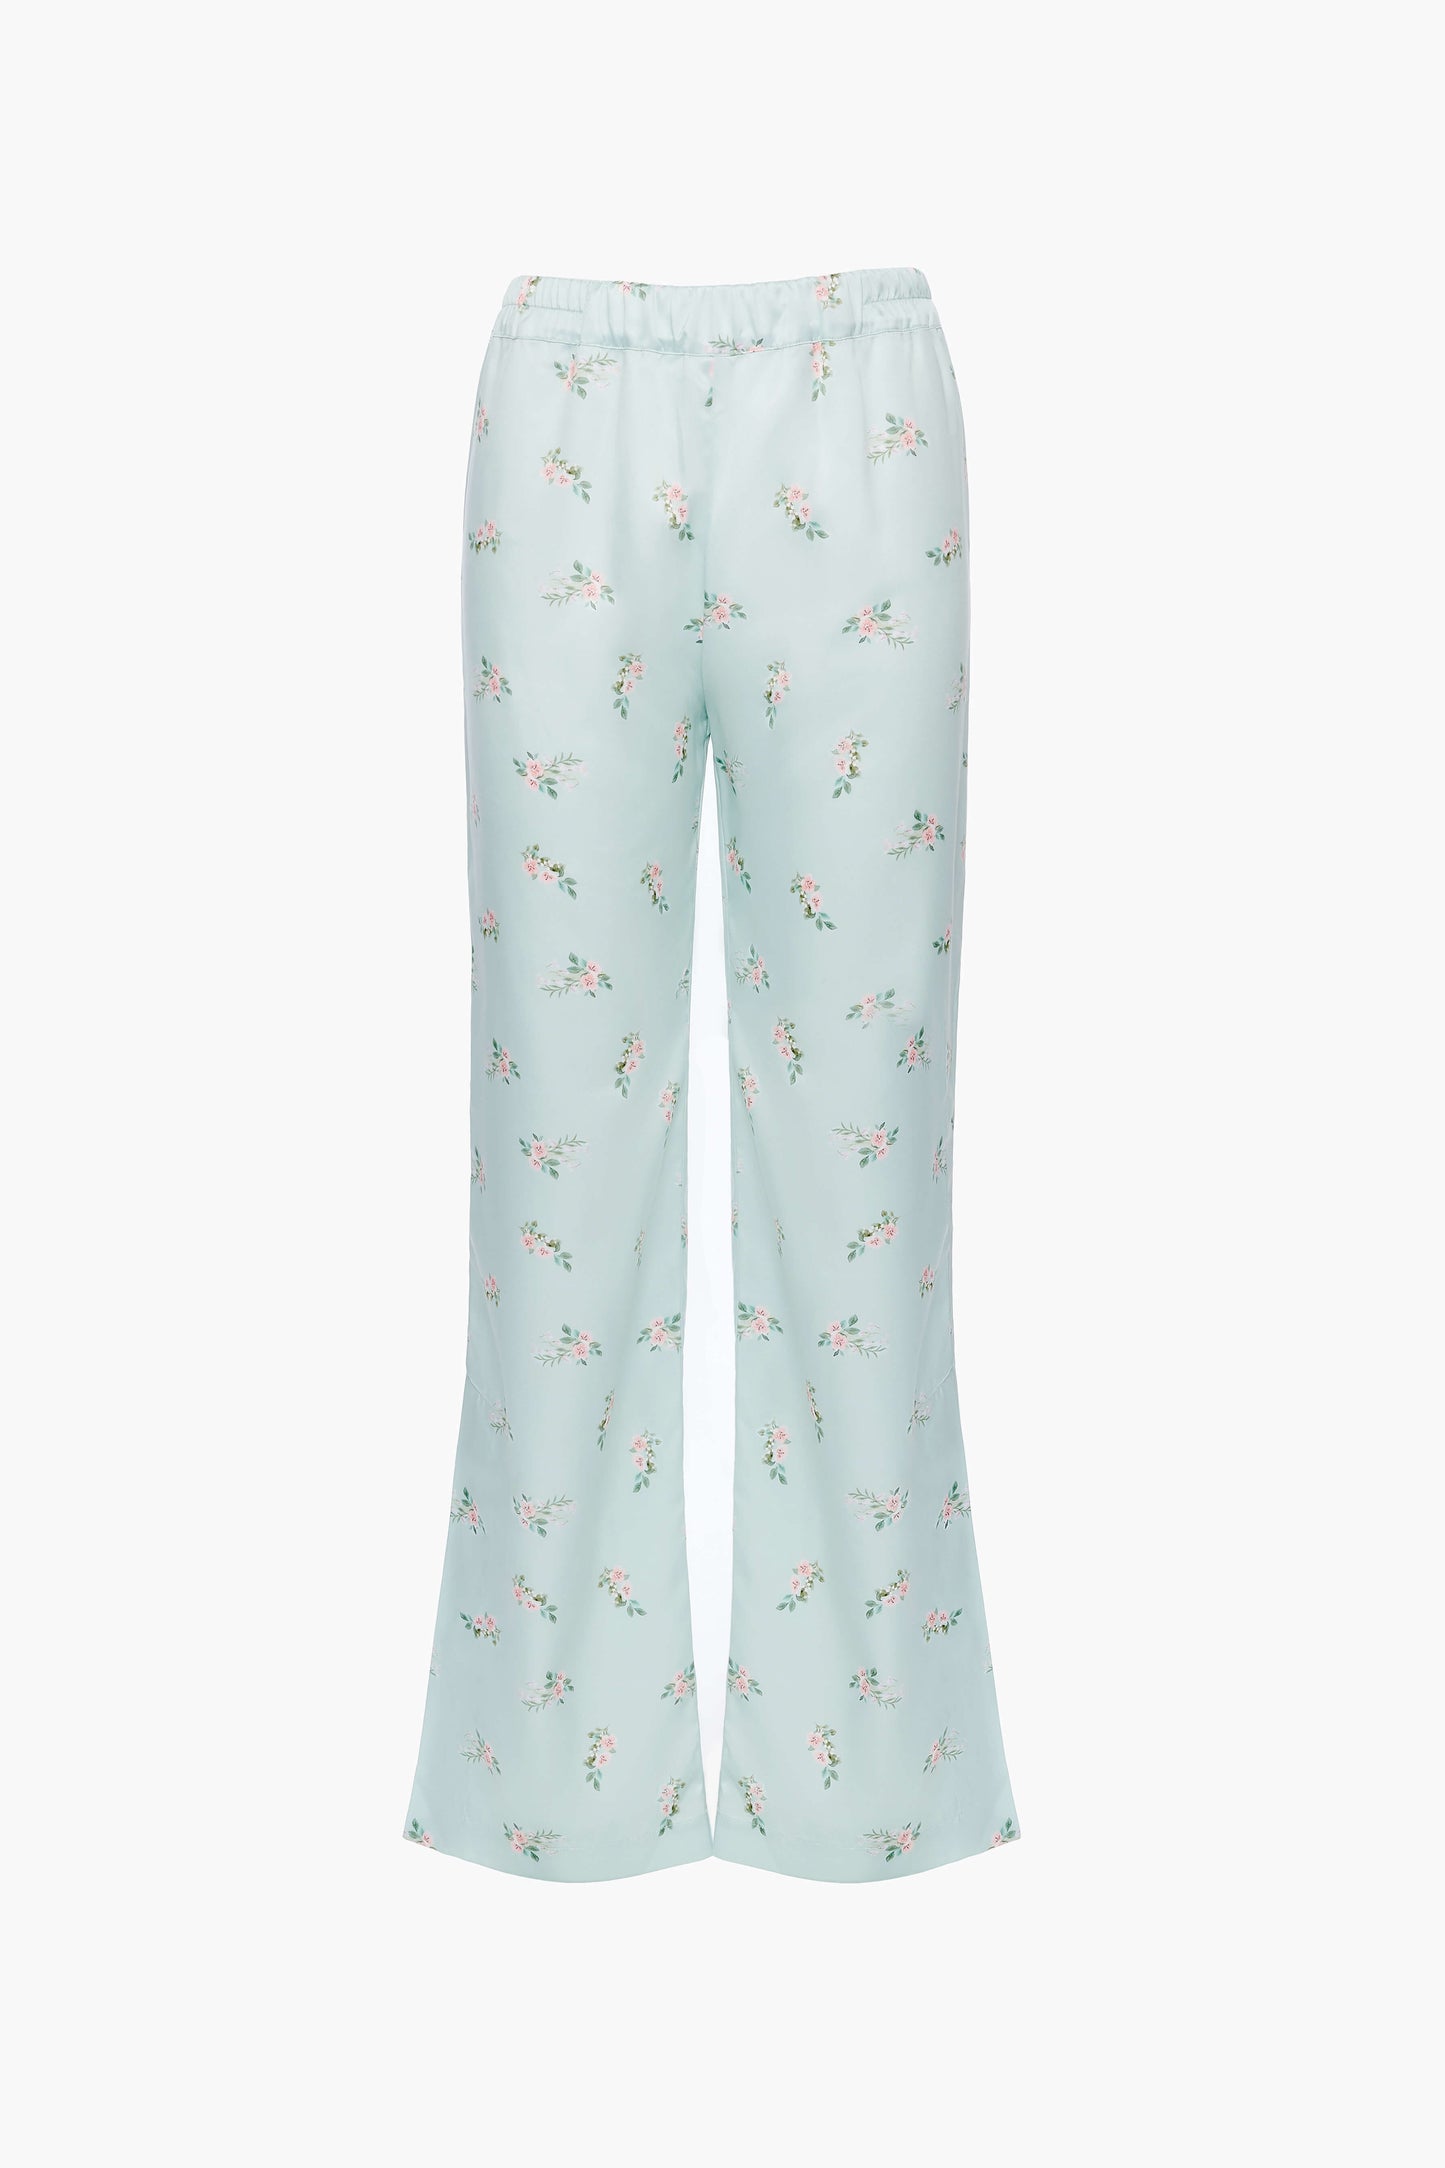 Blossom Printed Pants in Mint